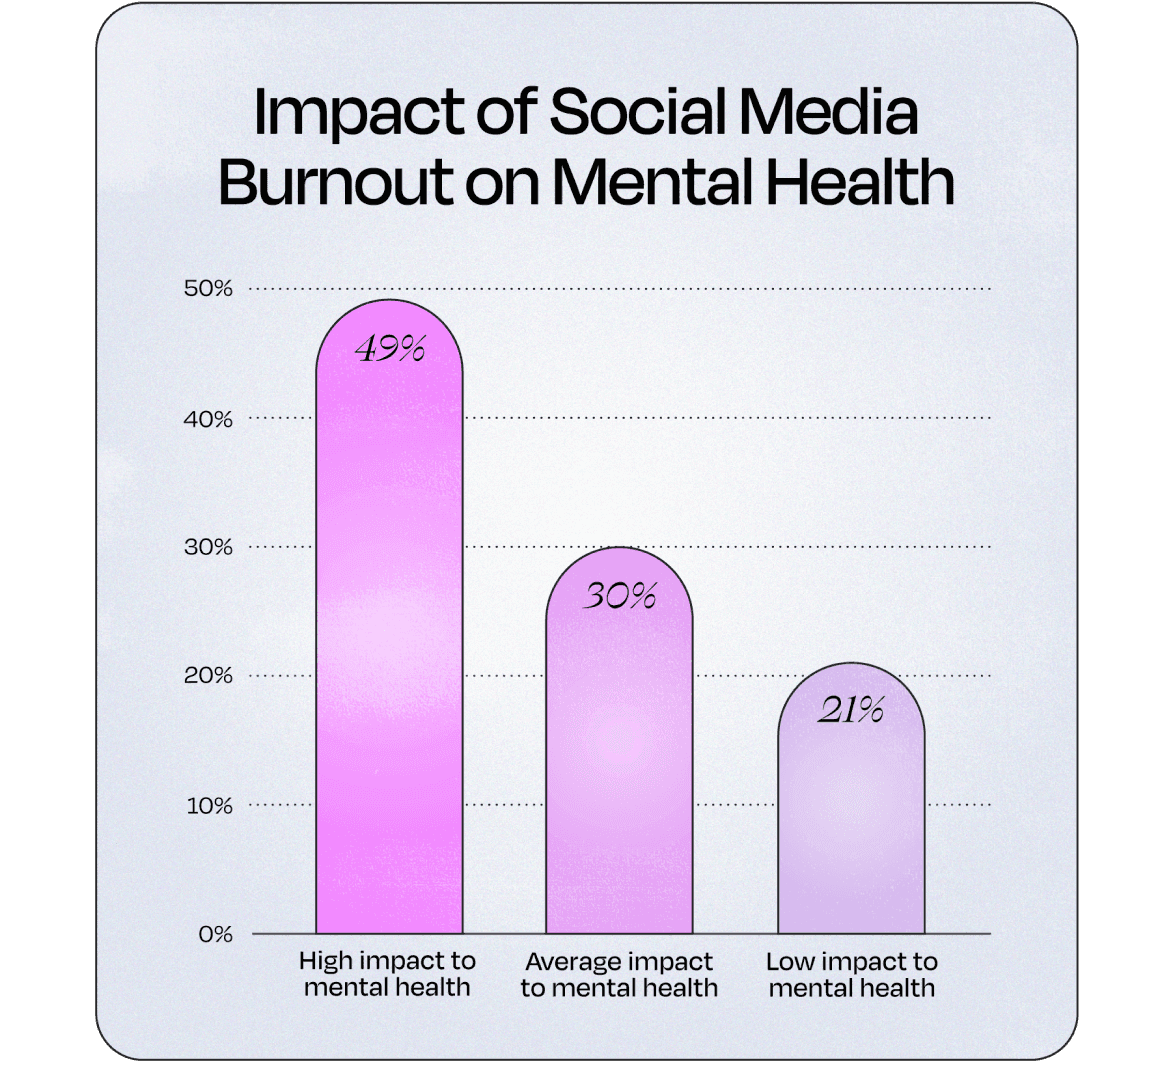 Horizontal bar chart showing 49% of social media burnout is high, 30% is average, and 21% is low among creators